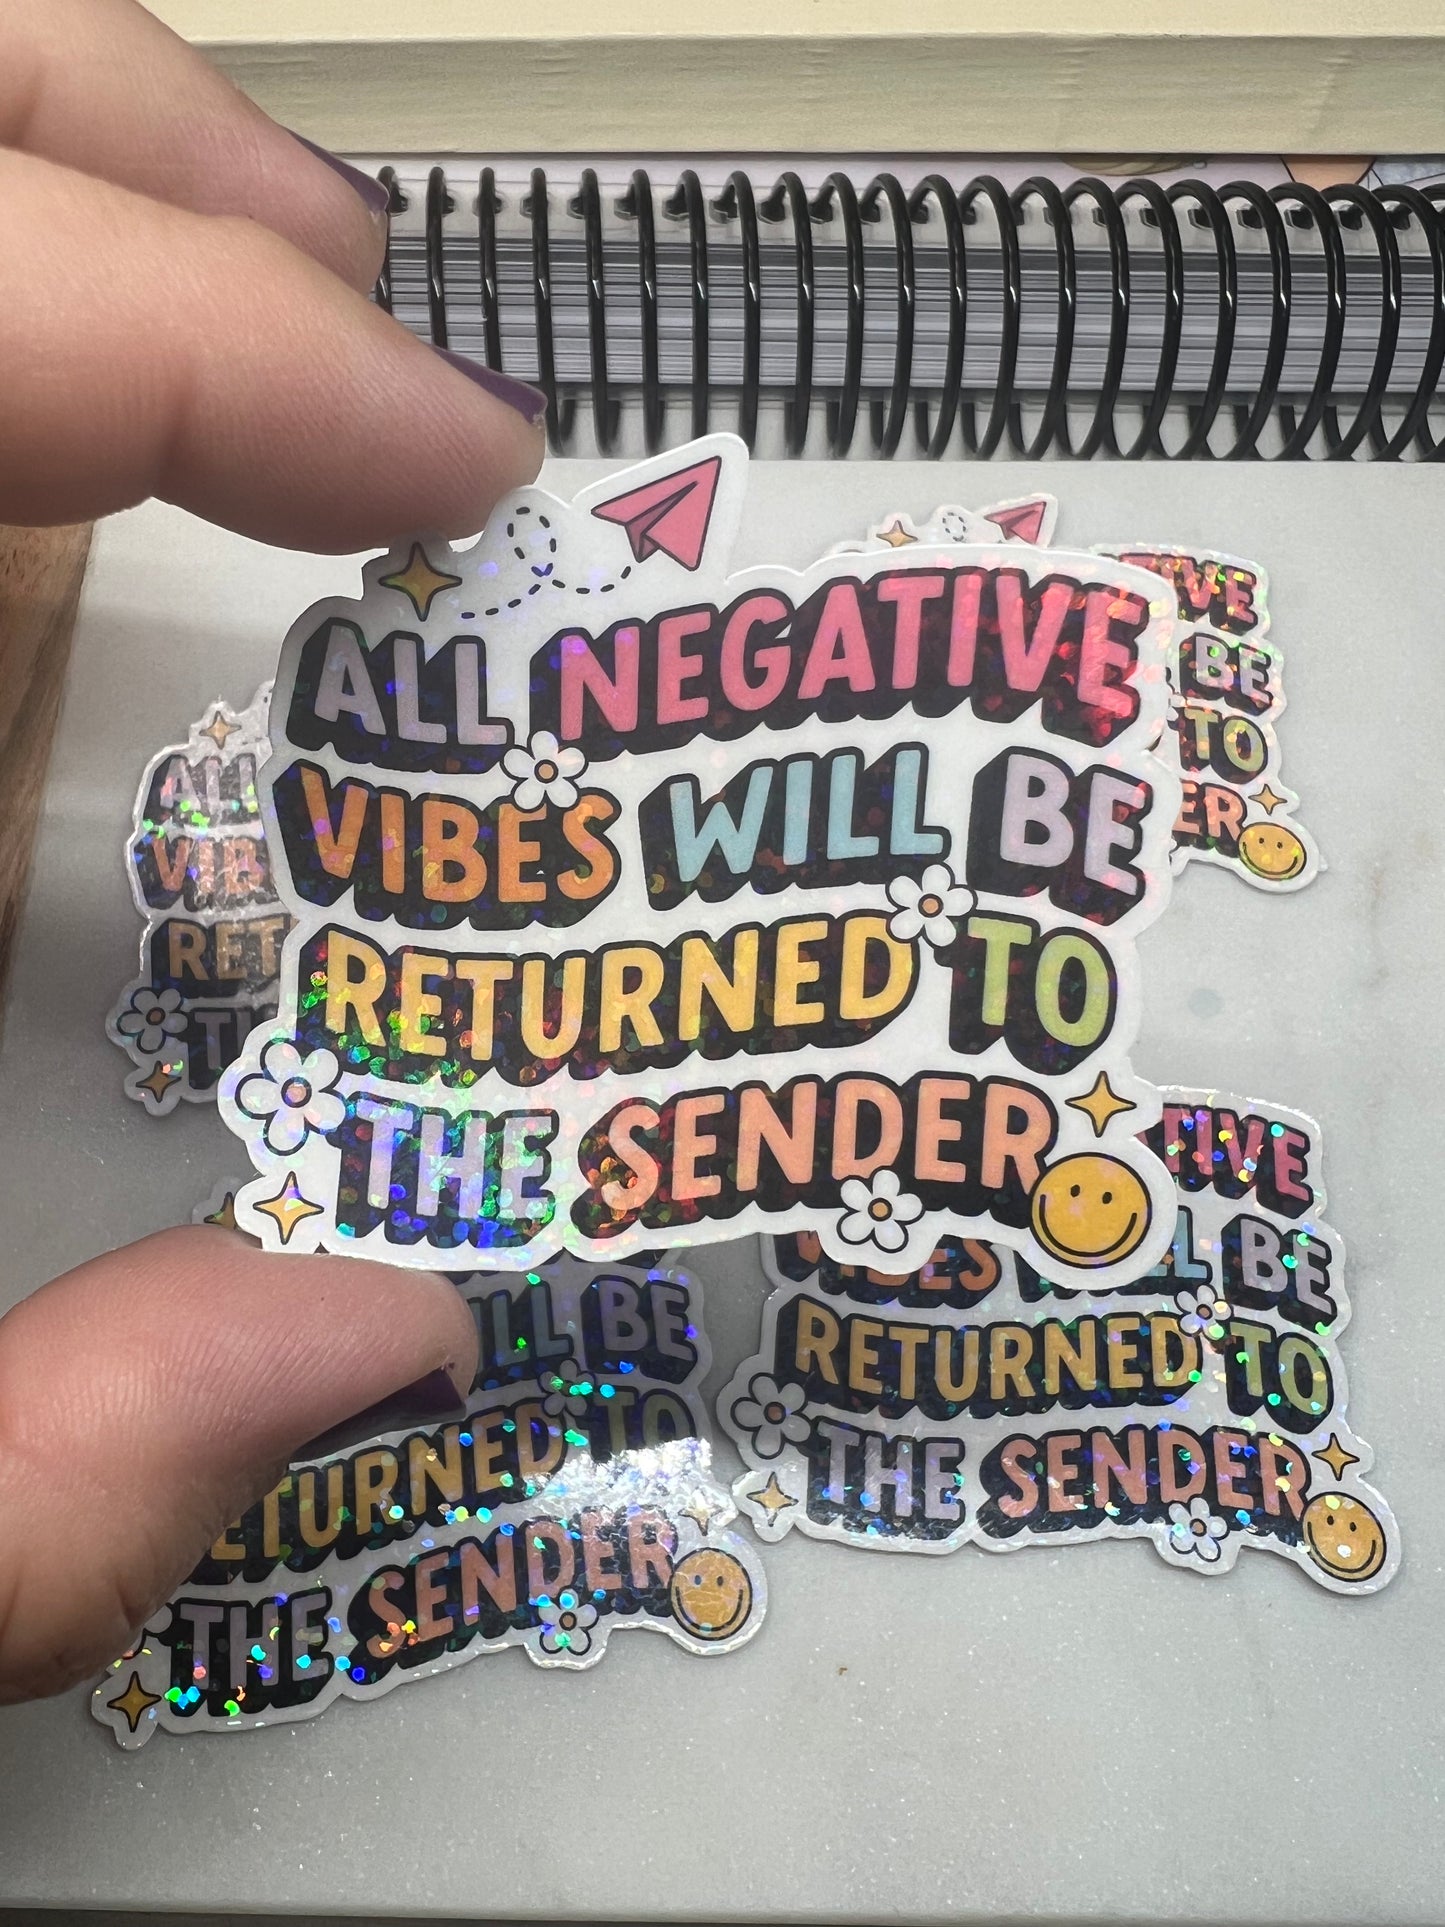 All Negative Vibes Will Be Returned to Sender Die Cut Sticker